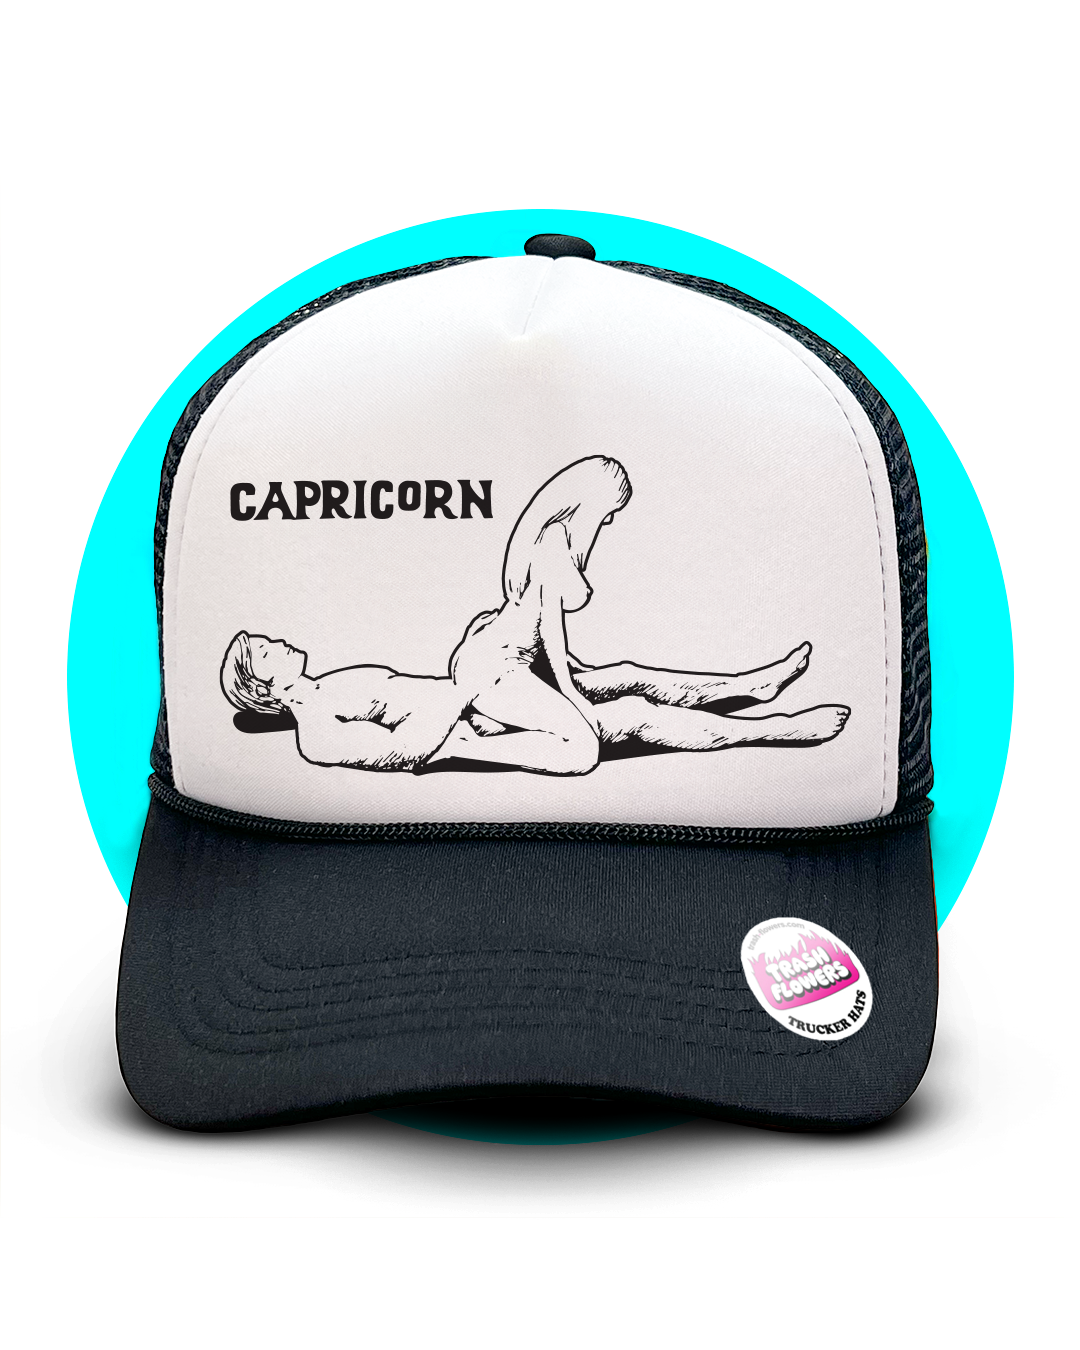 What's Your Sign? Zodiac Trucker Hat